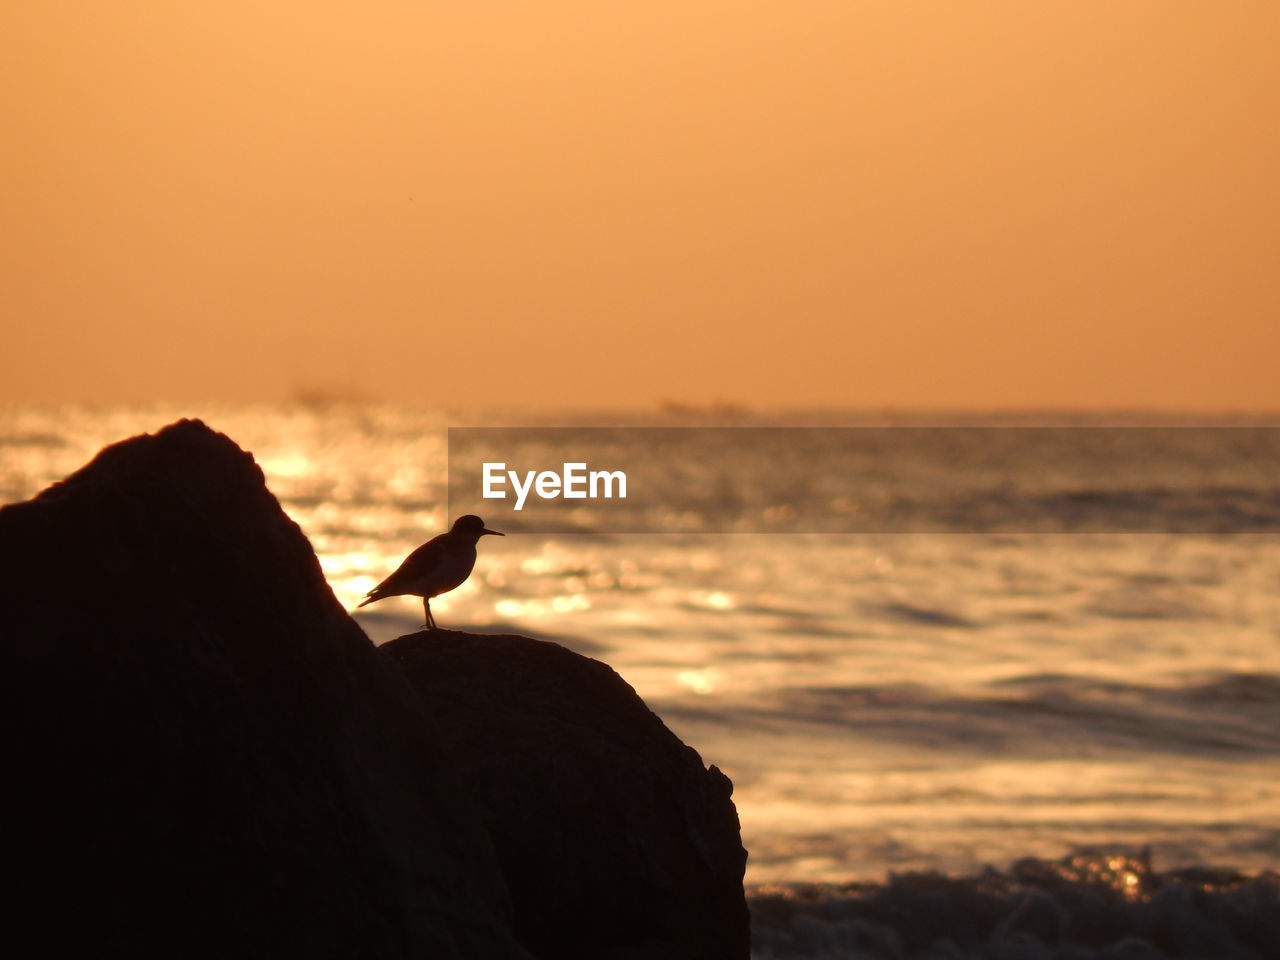 Silhouette bird on rock against sky during sunset